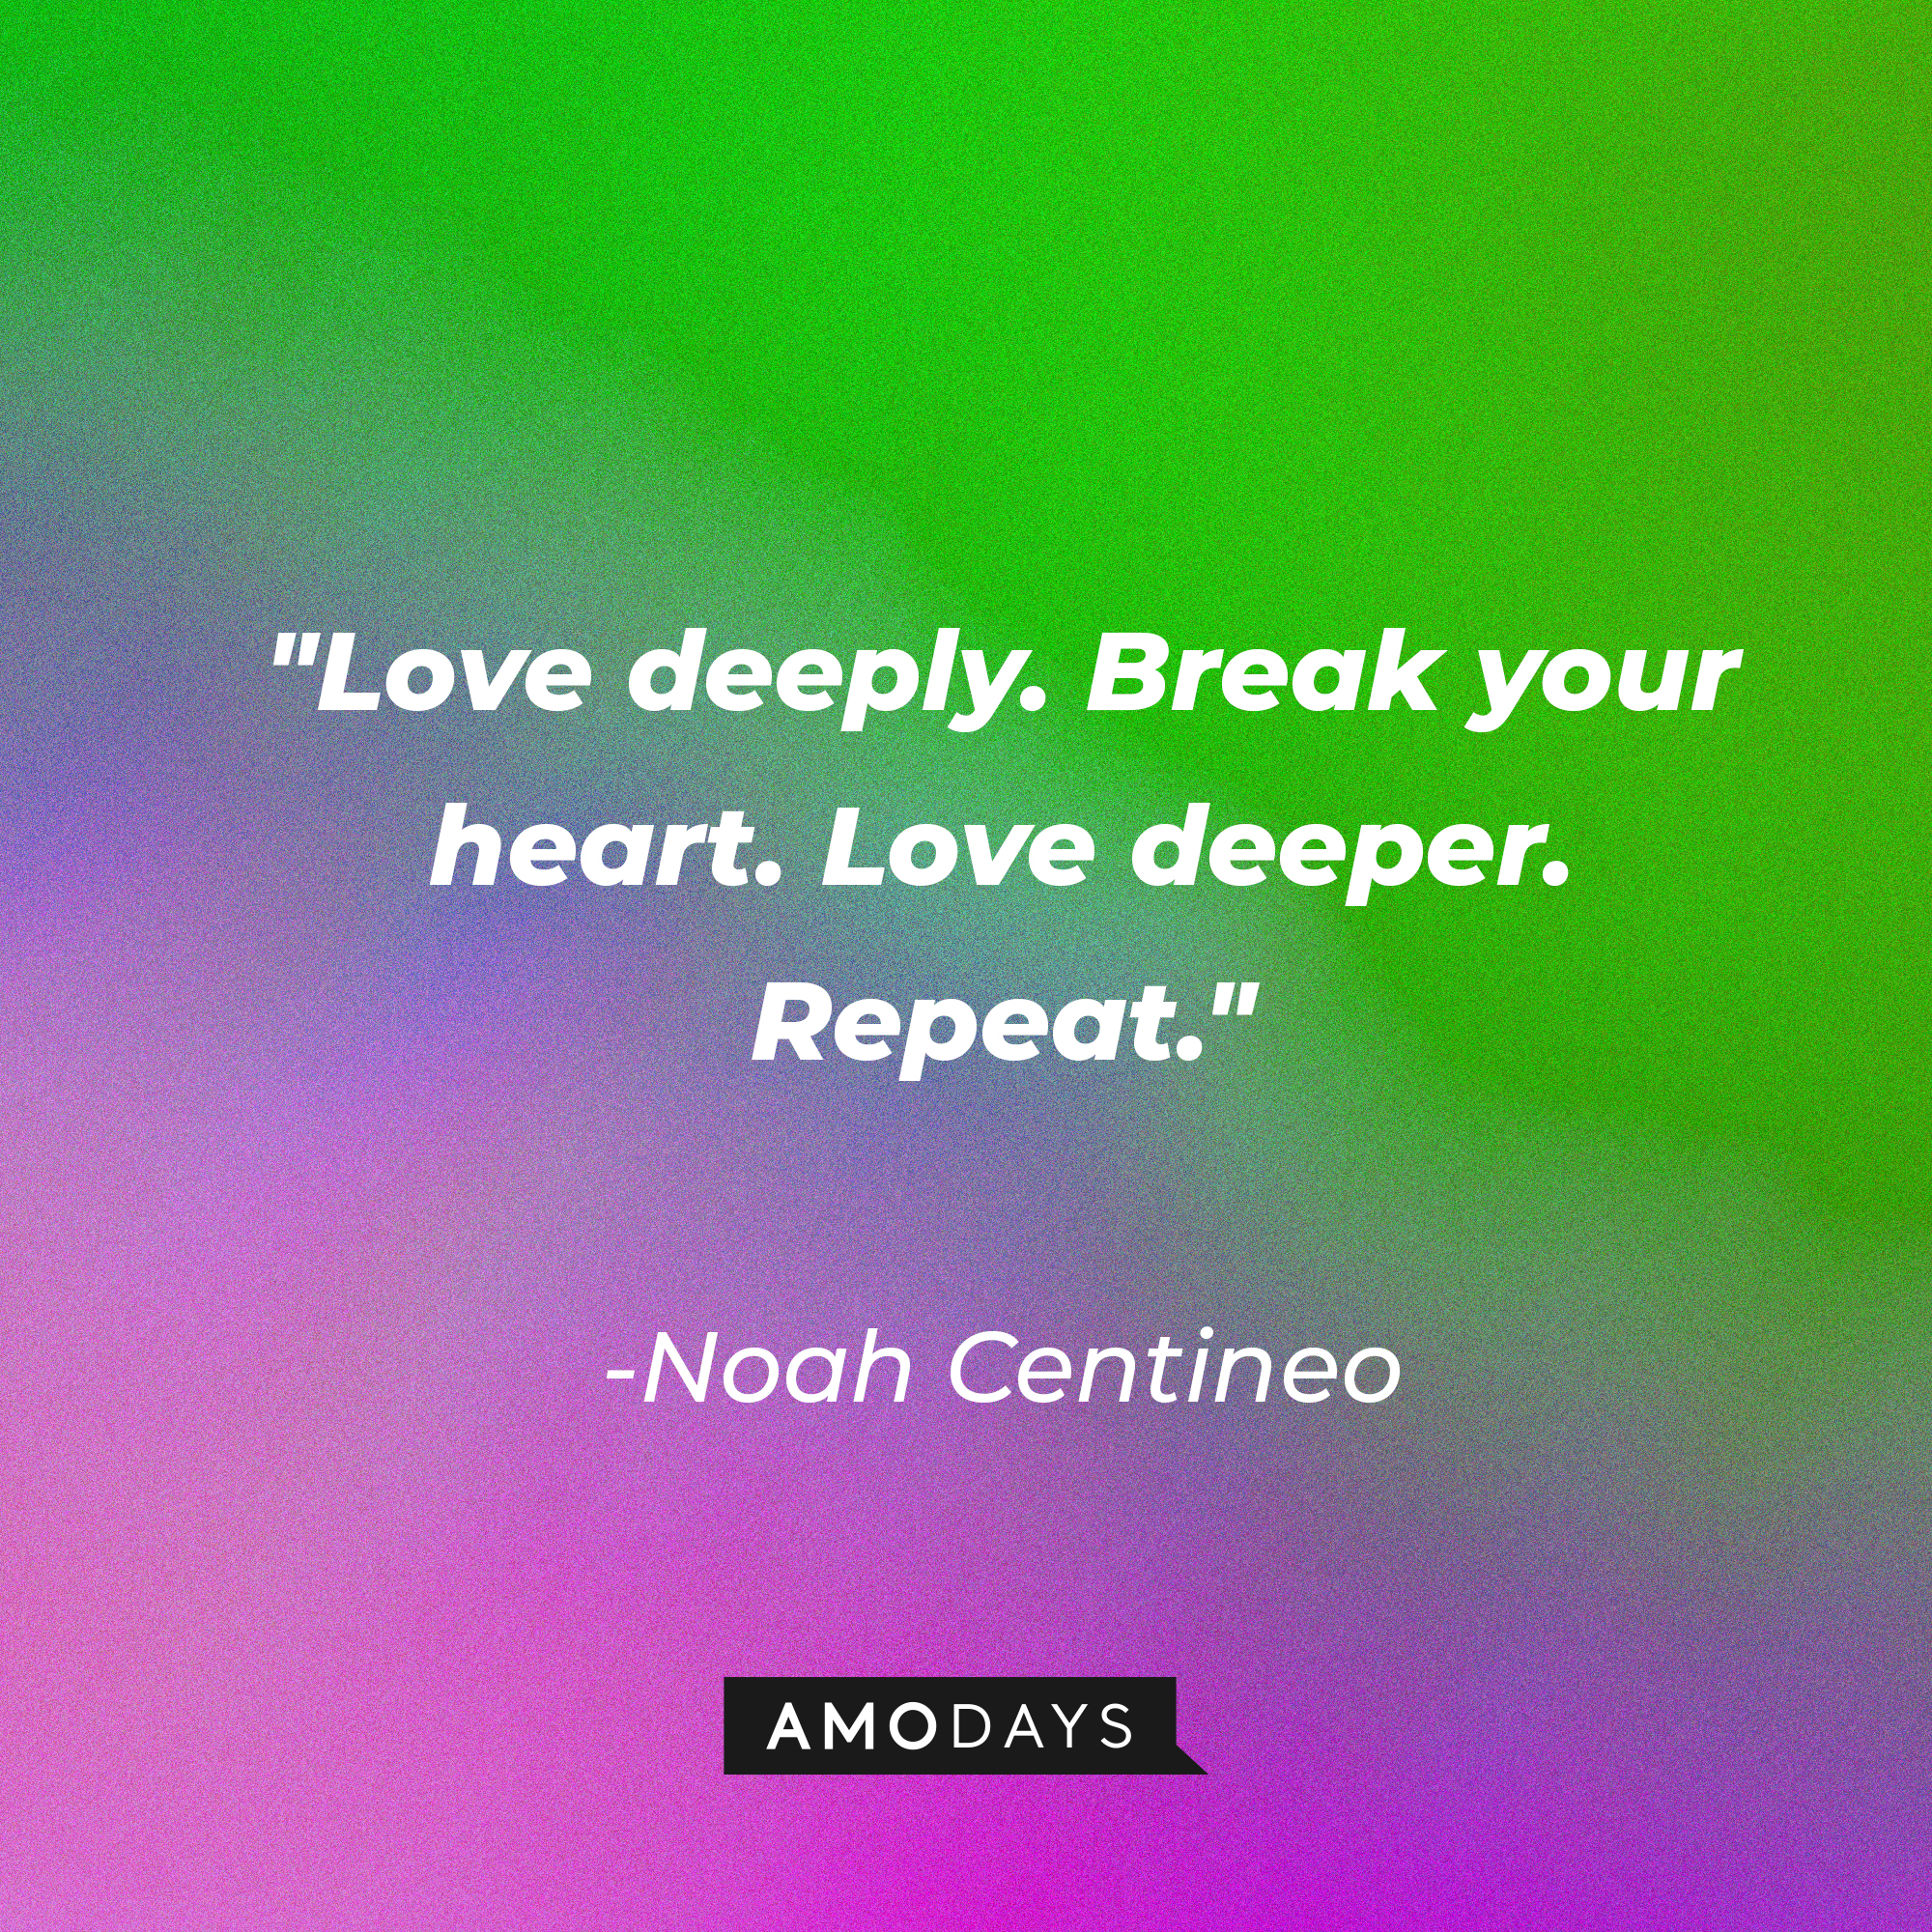 Noah Centineo's quote: "Love deeply. Break your heart. Love deeper. Repeat." | Image: AmoDays